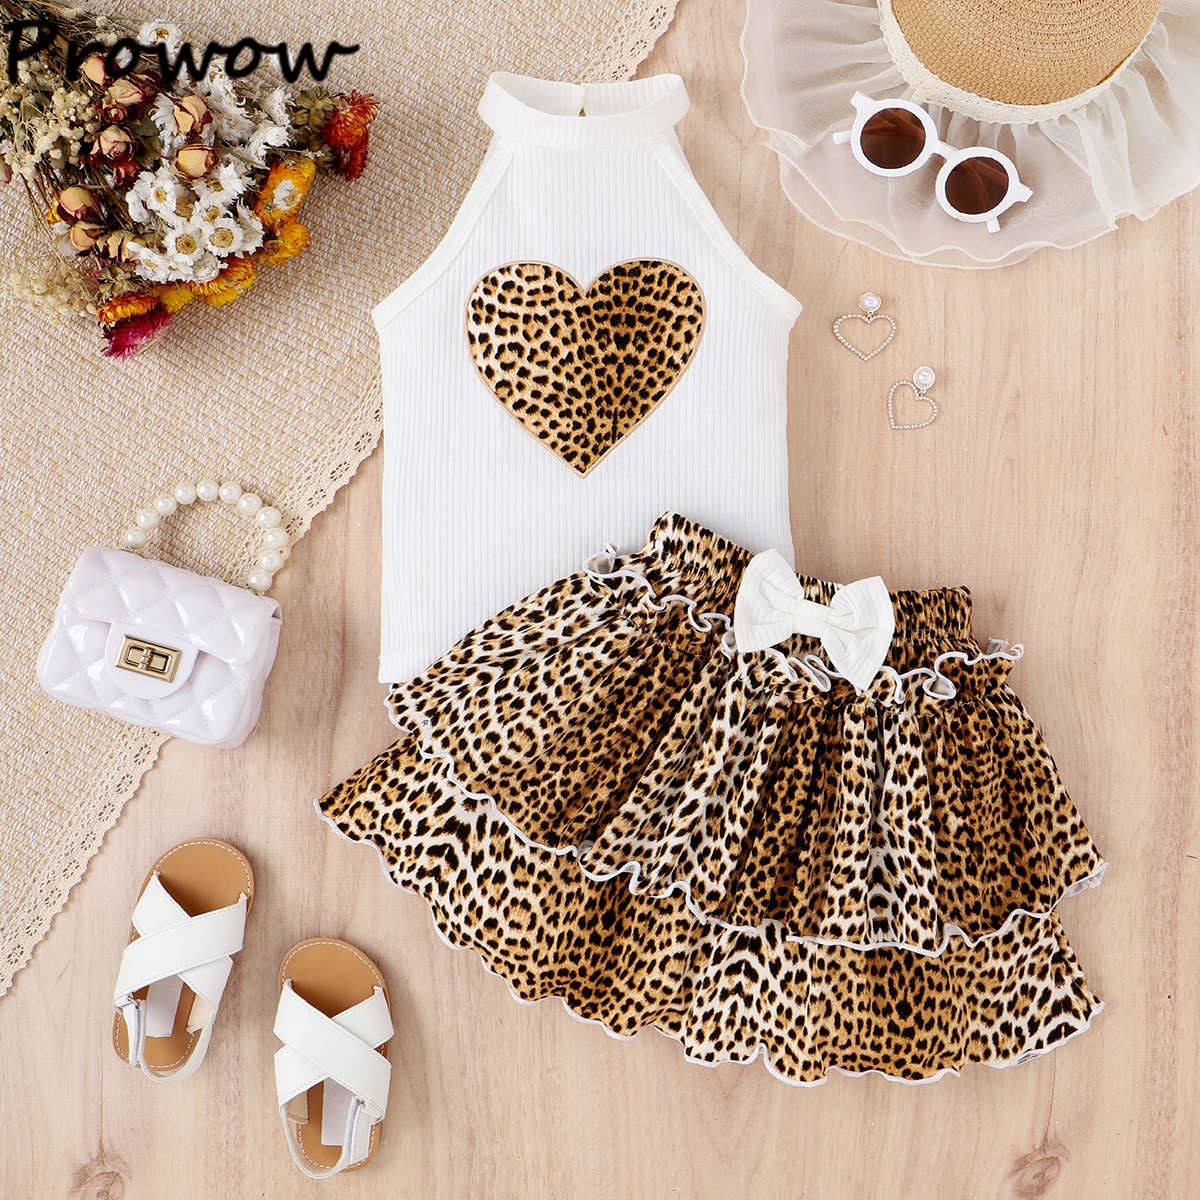 Prowow-4-7Y-Children-Skirts-Sets-For-Girls-Halter-Heart-Top-and-Frill-Cake-Skirt-Leopard-4